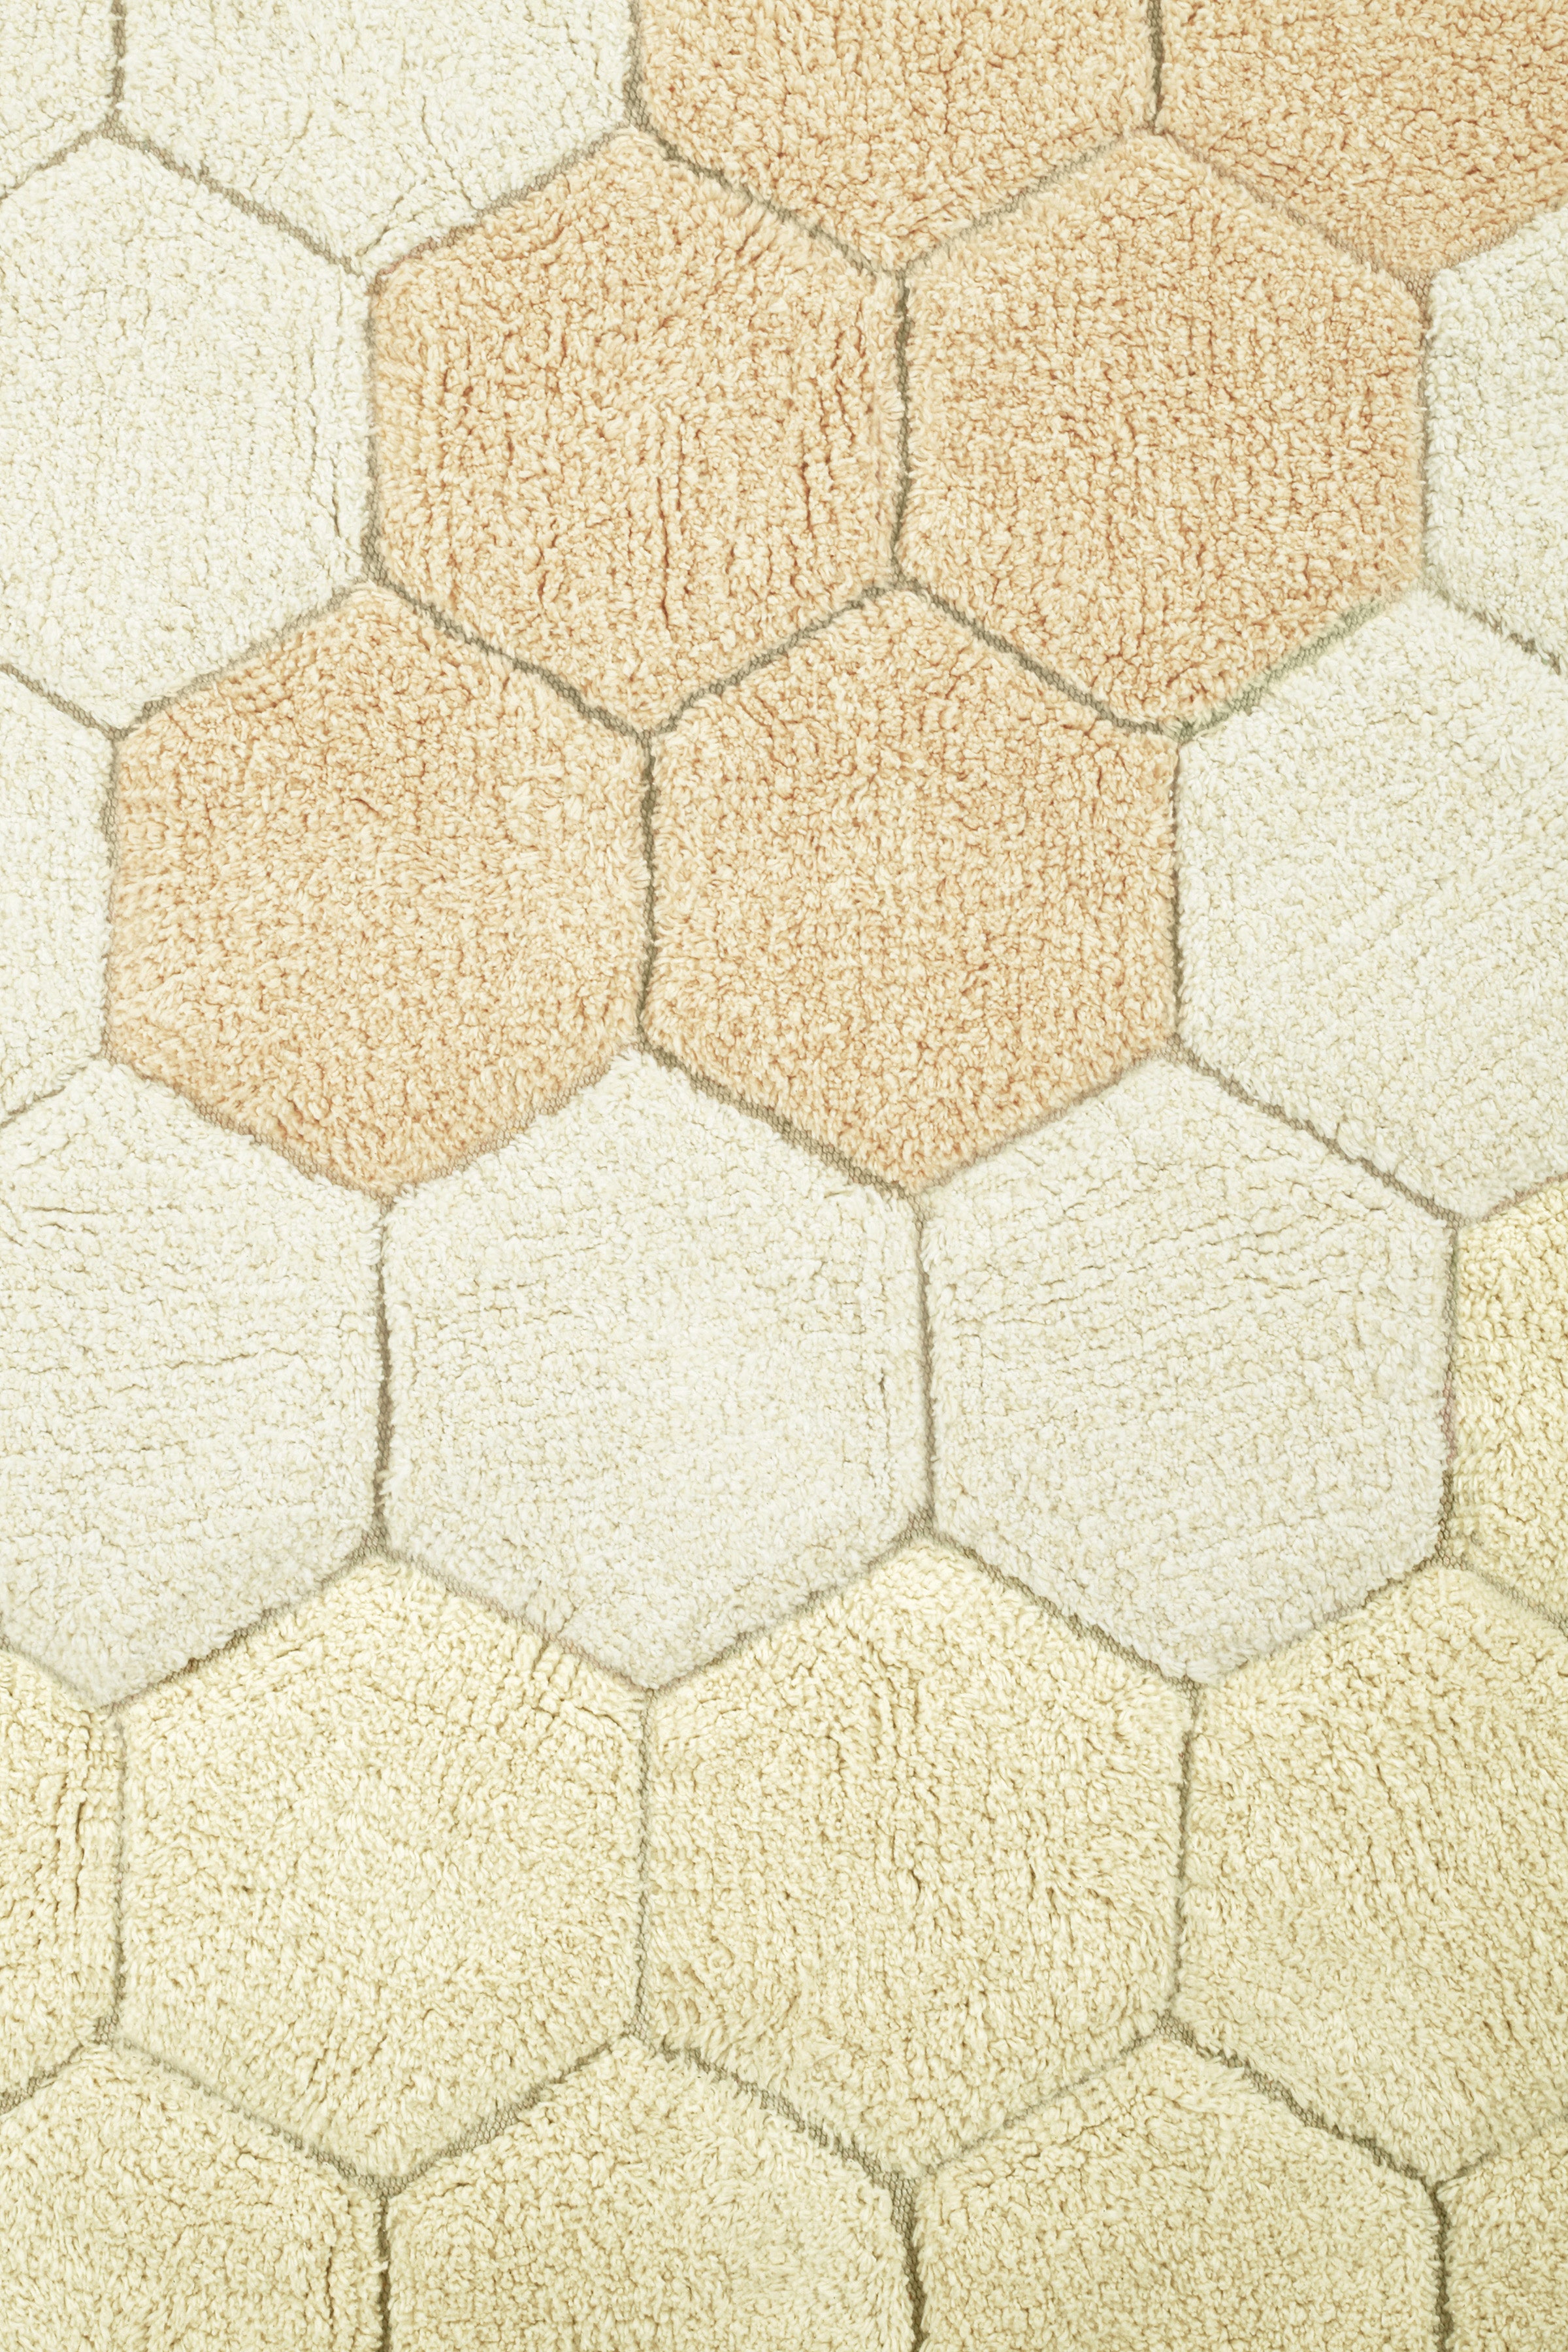 Round gold rug with honeycomb pattern